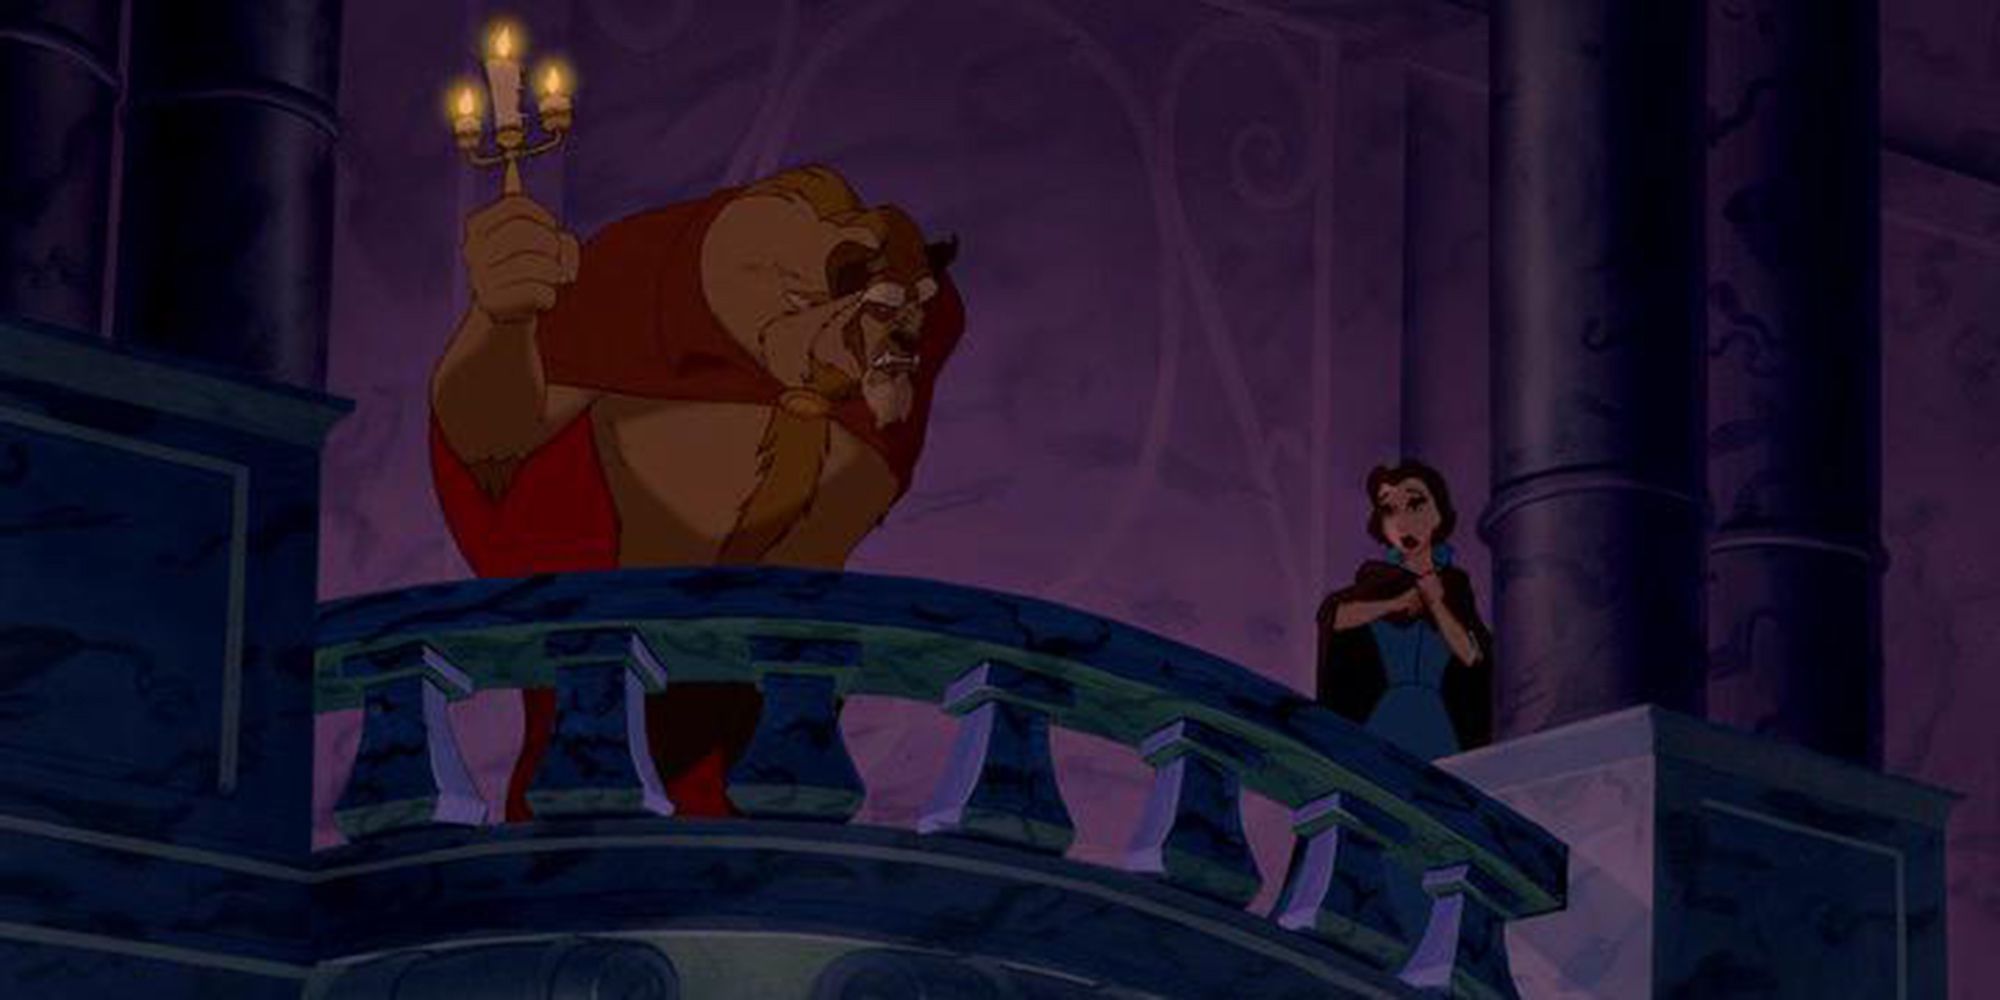 Belle and the Beast on a balcony